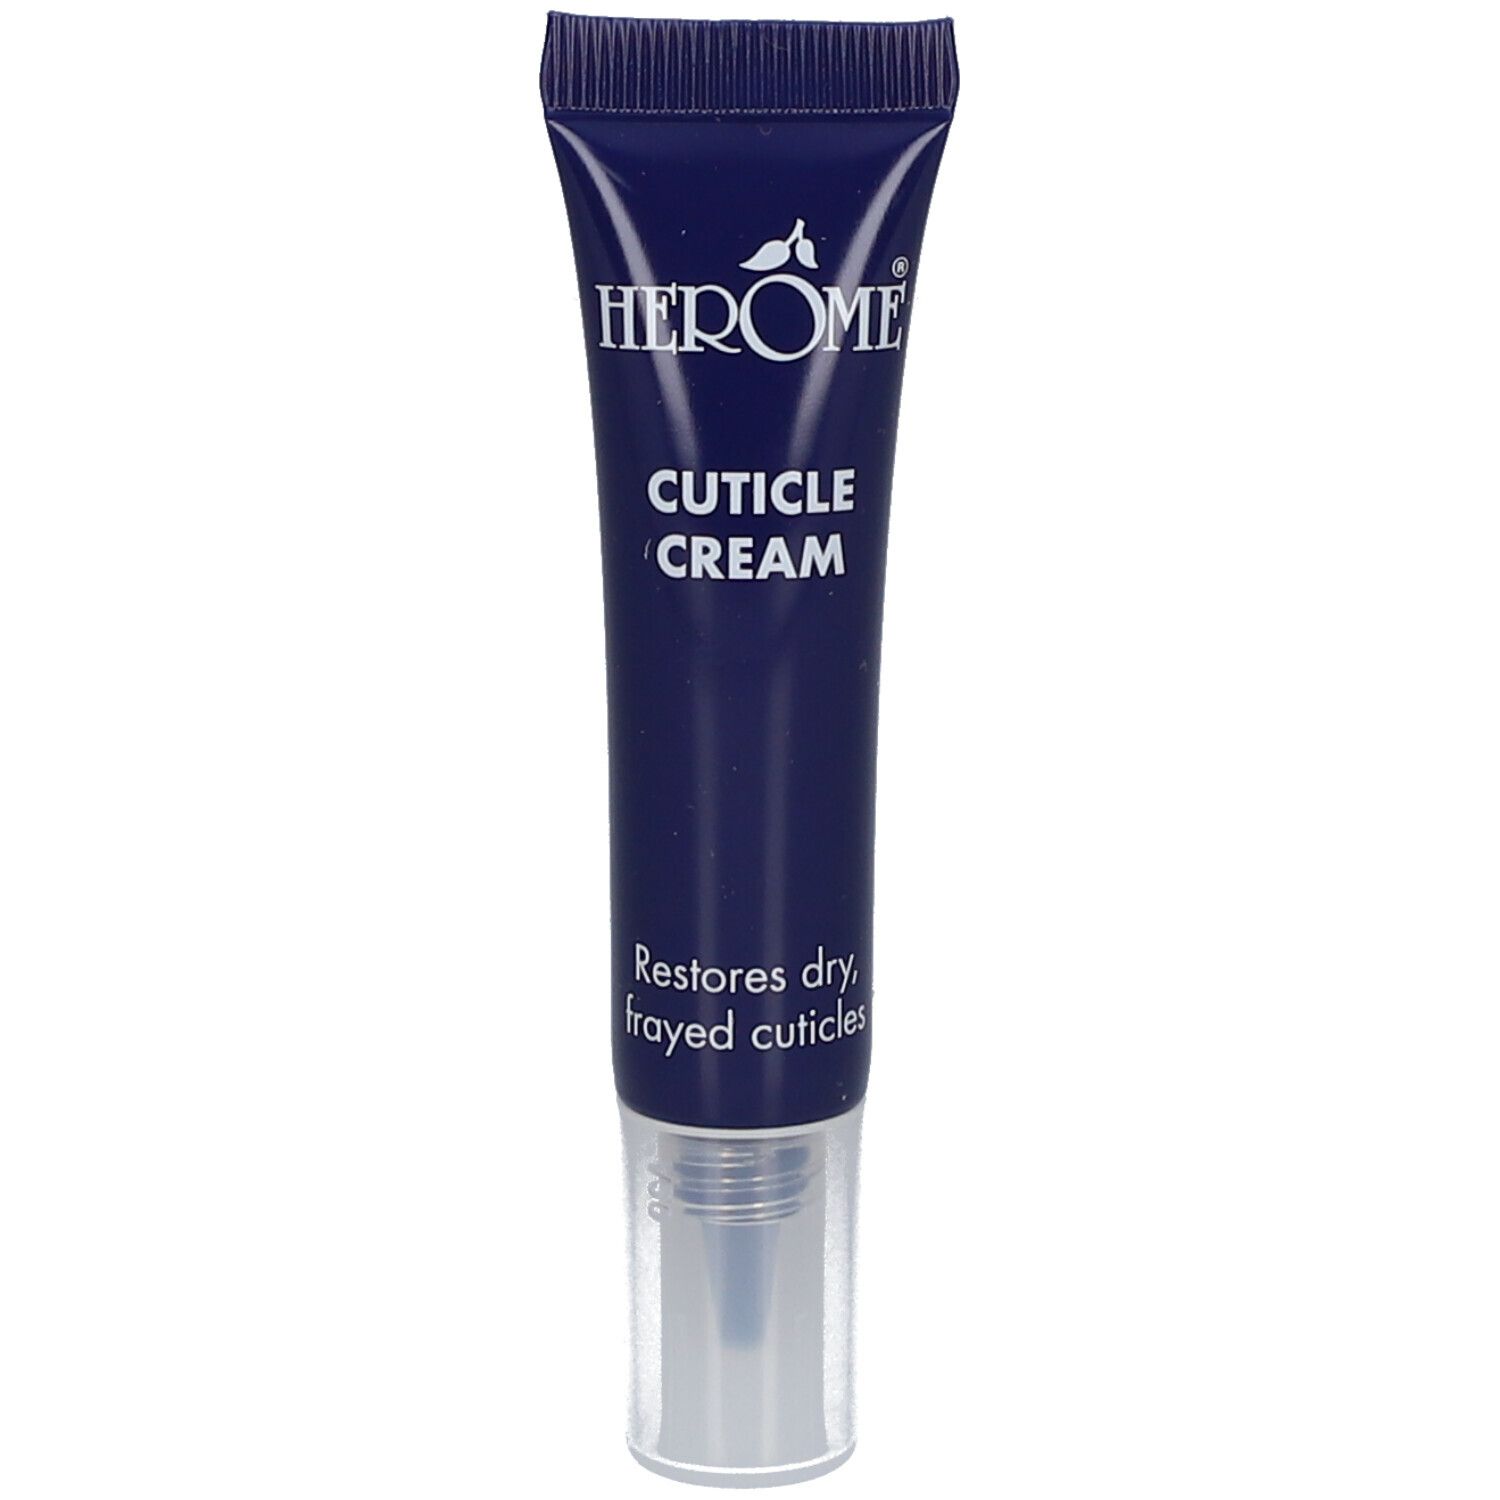 Image of HERÔME® Cuticle Cream